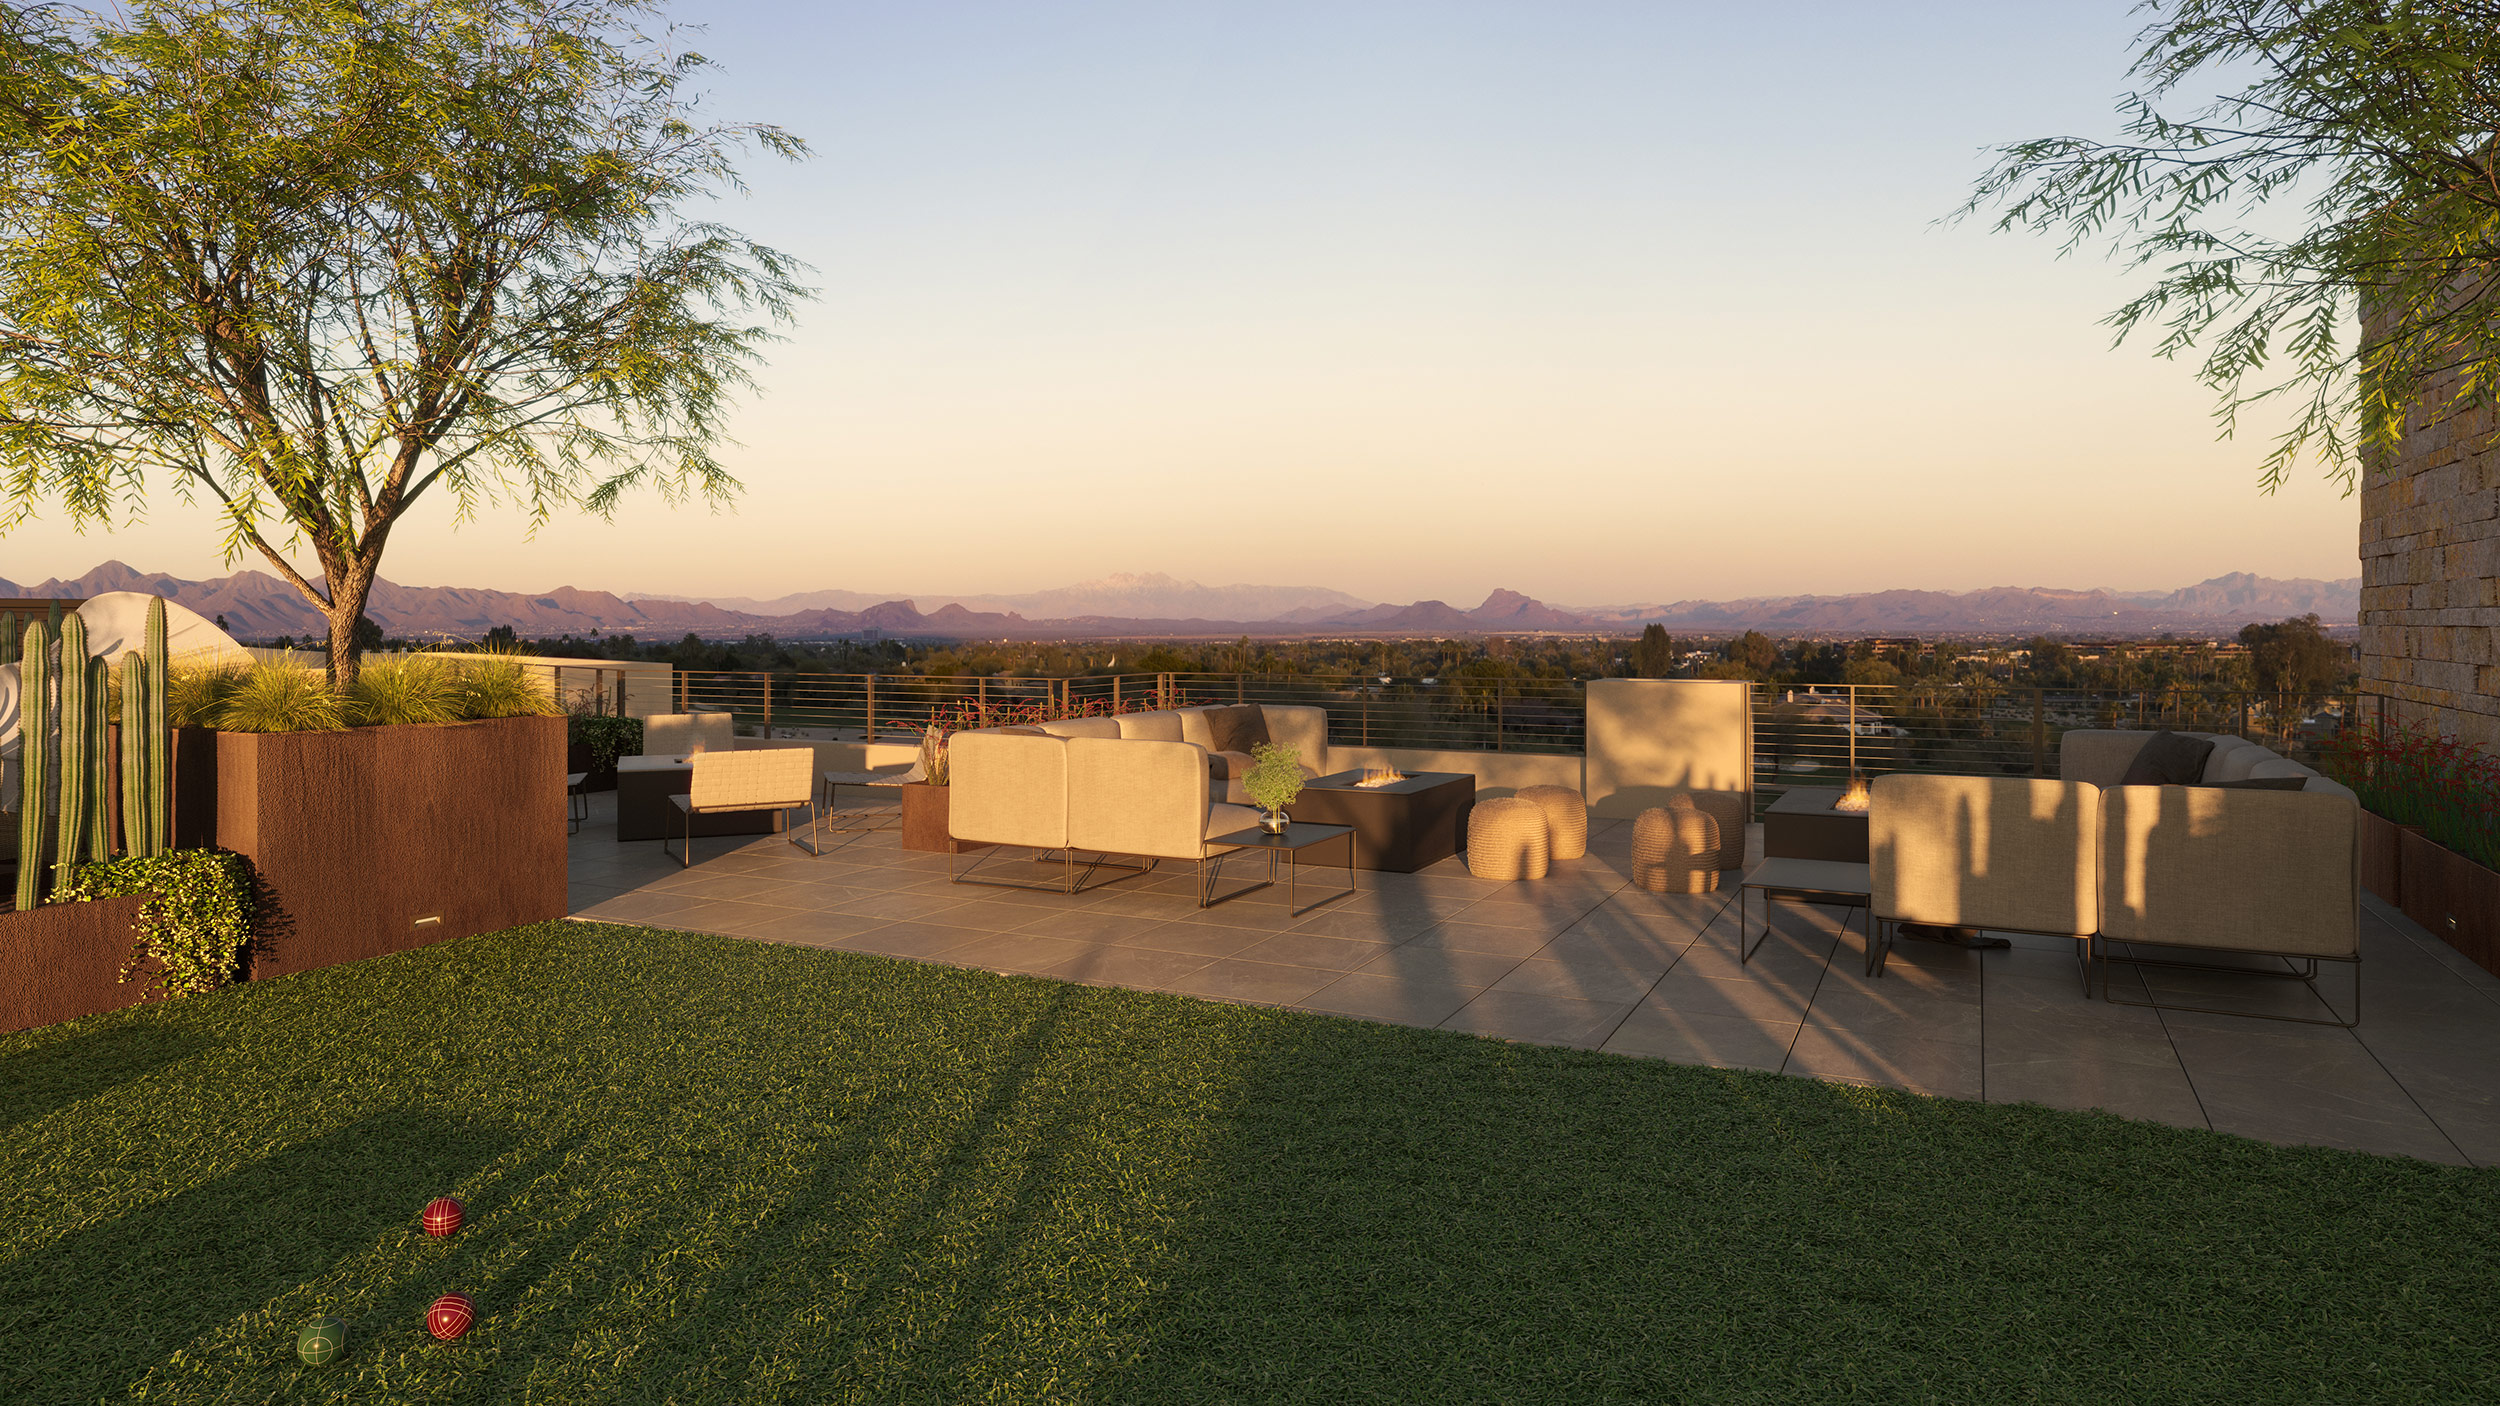 From The Summit, residents and guests will enjoy views of the Valley by day and city lights by night.